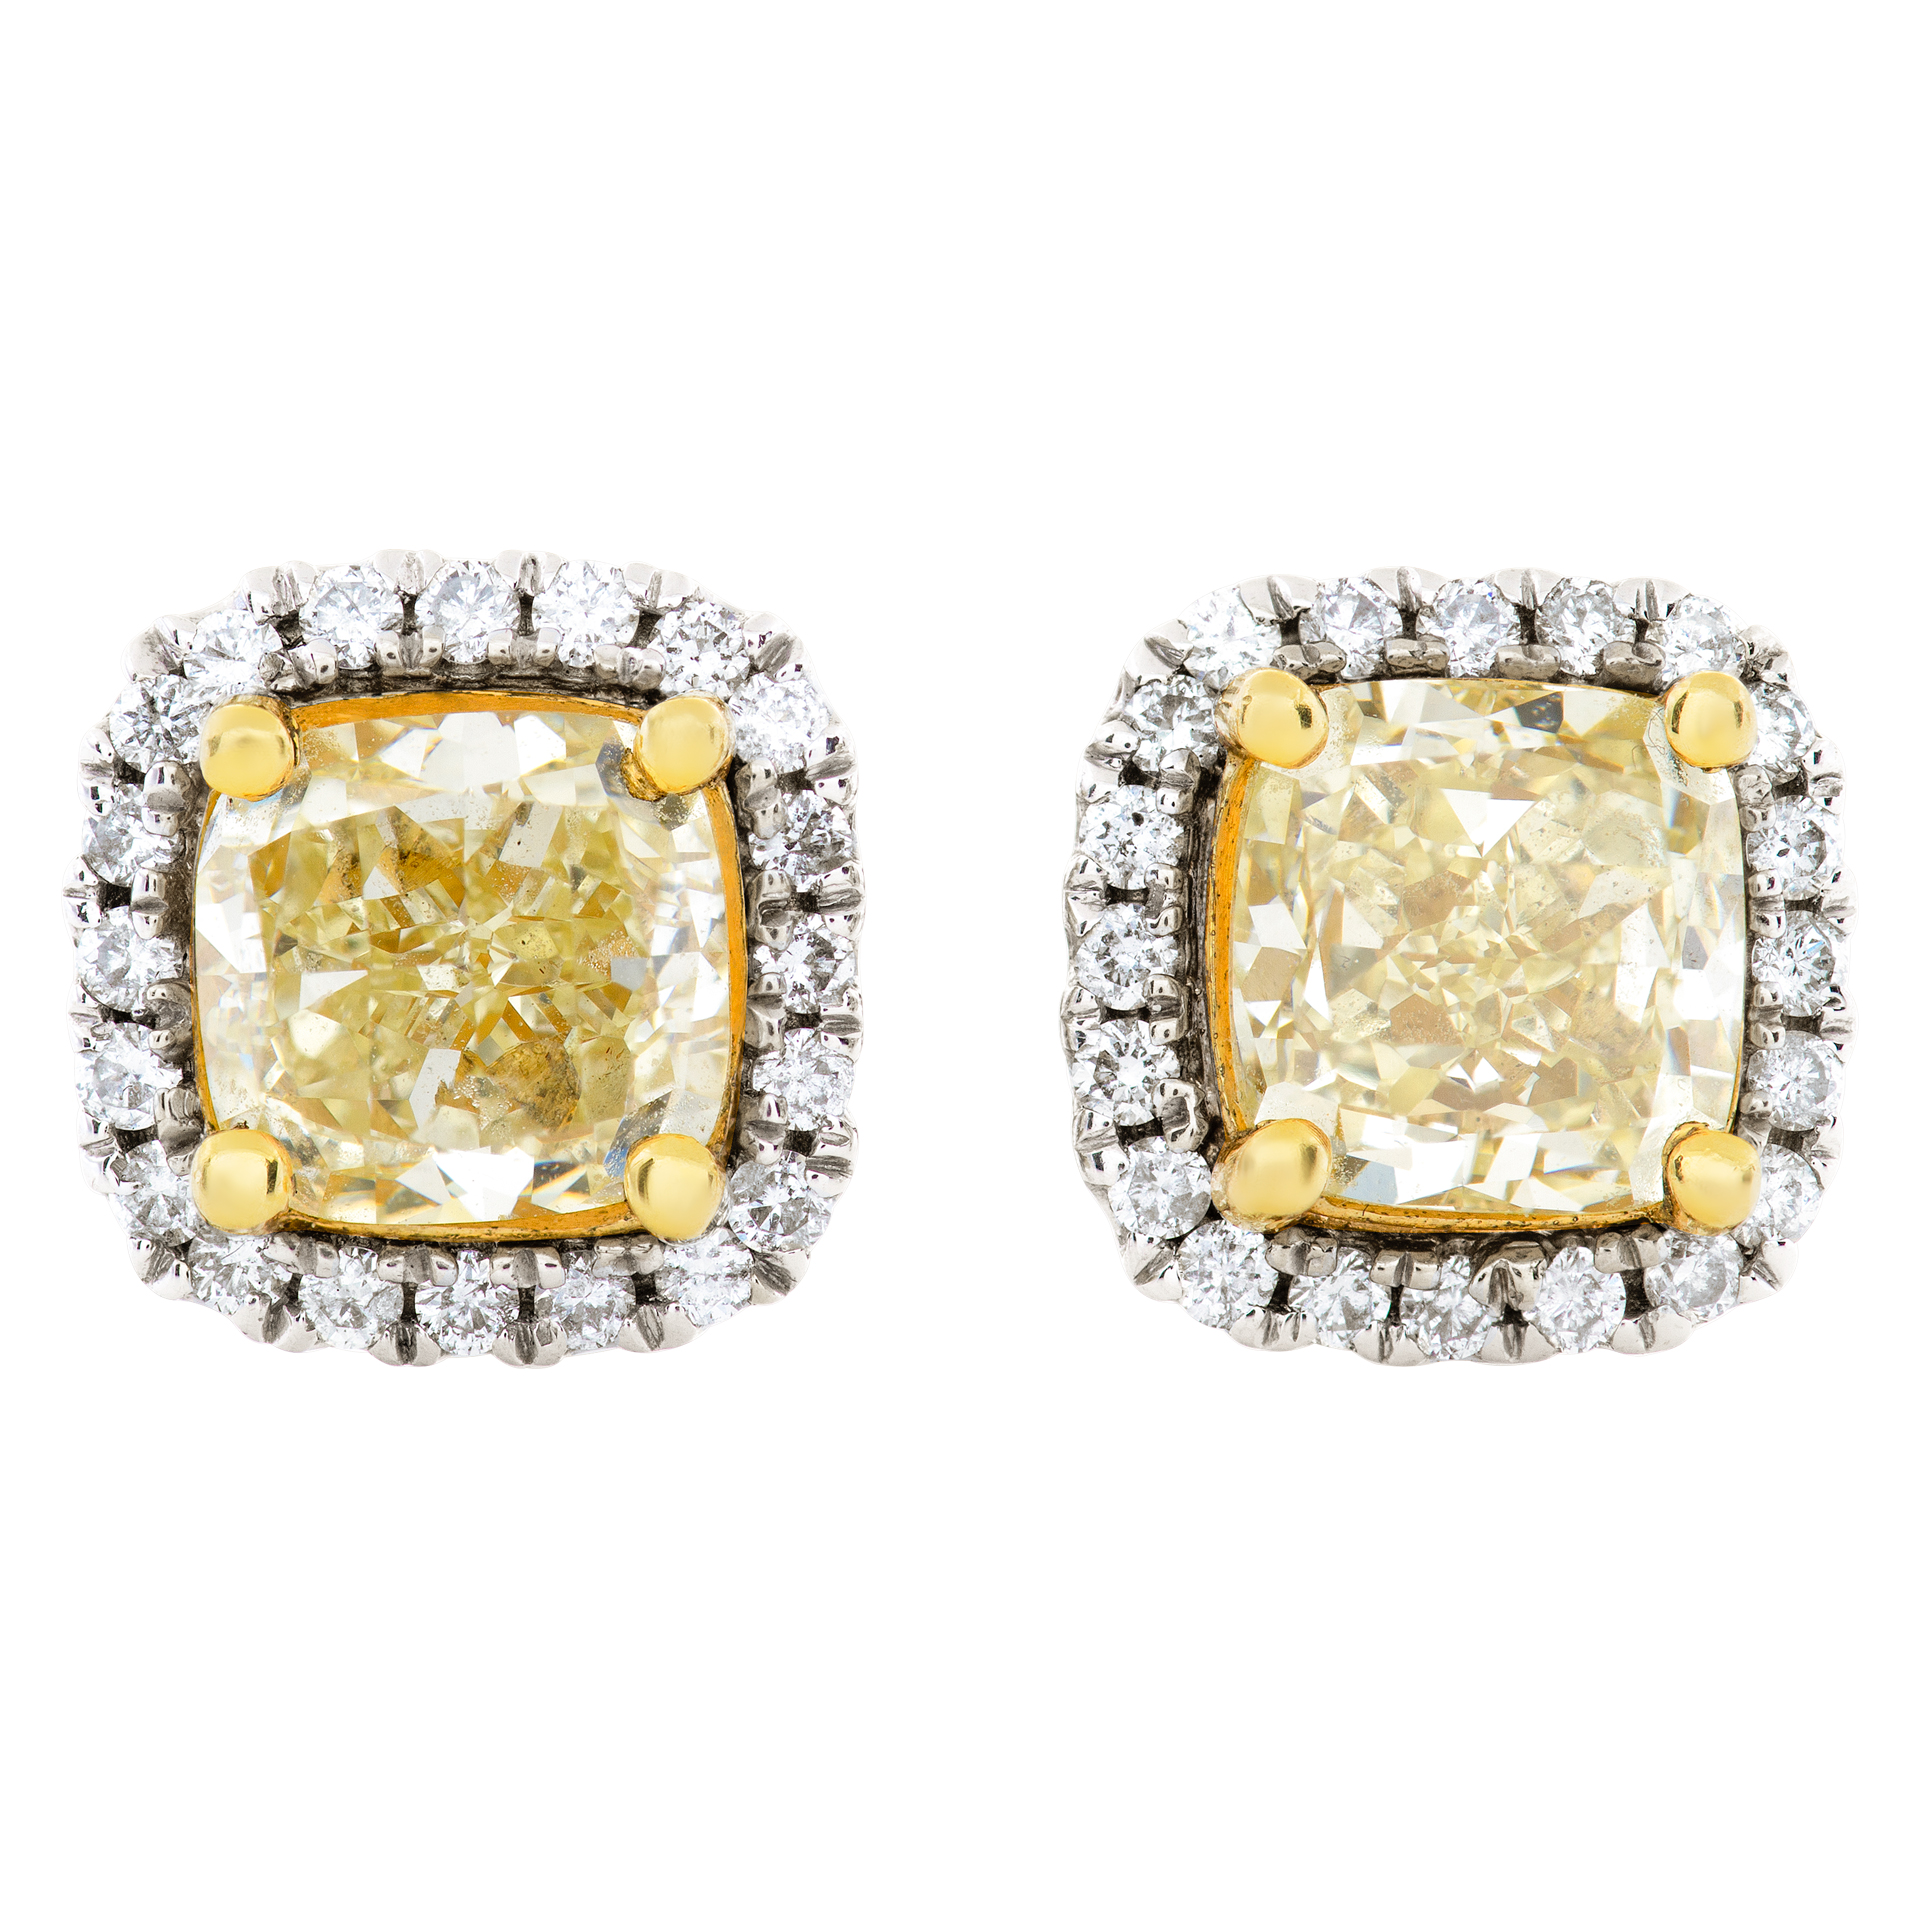 18k White and yellow gold diamond studs with 1.30 & 1.33 carats in yellow diamond